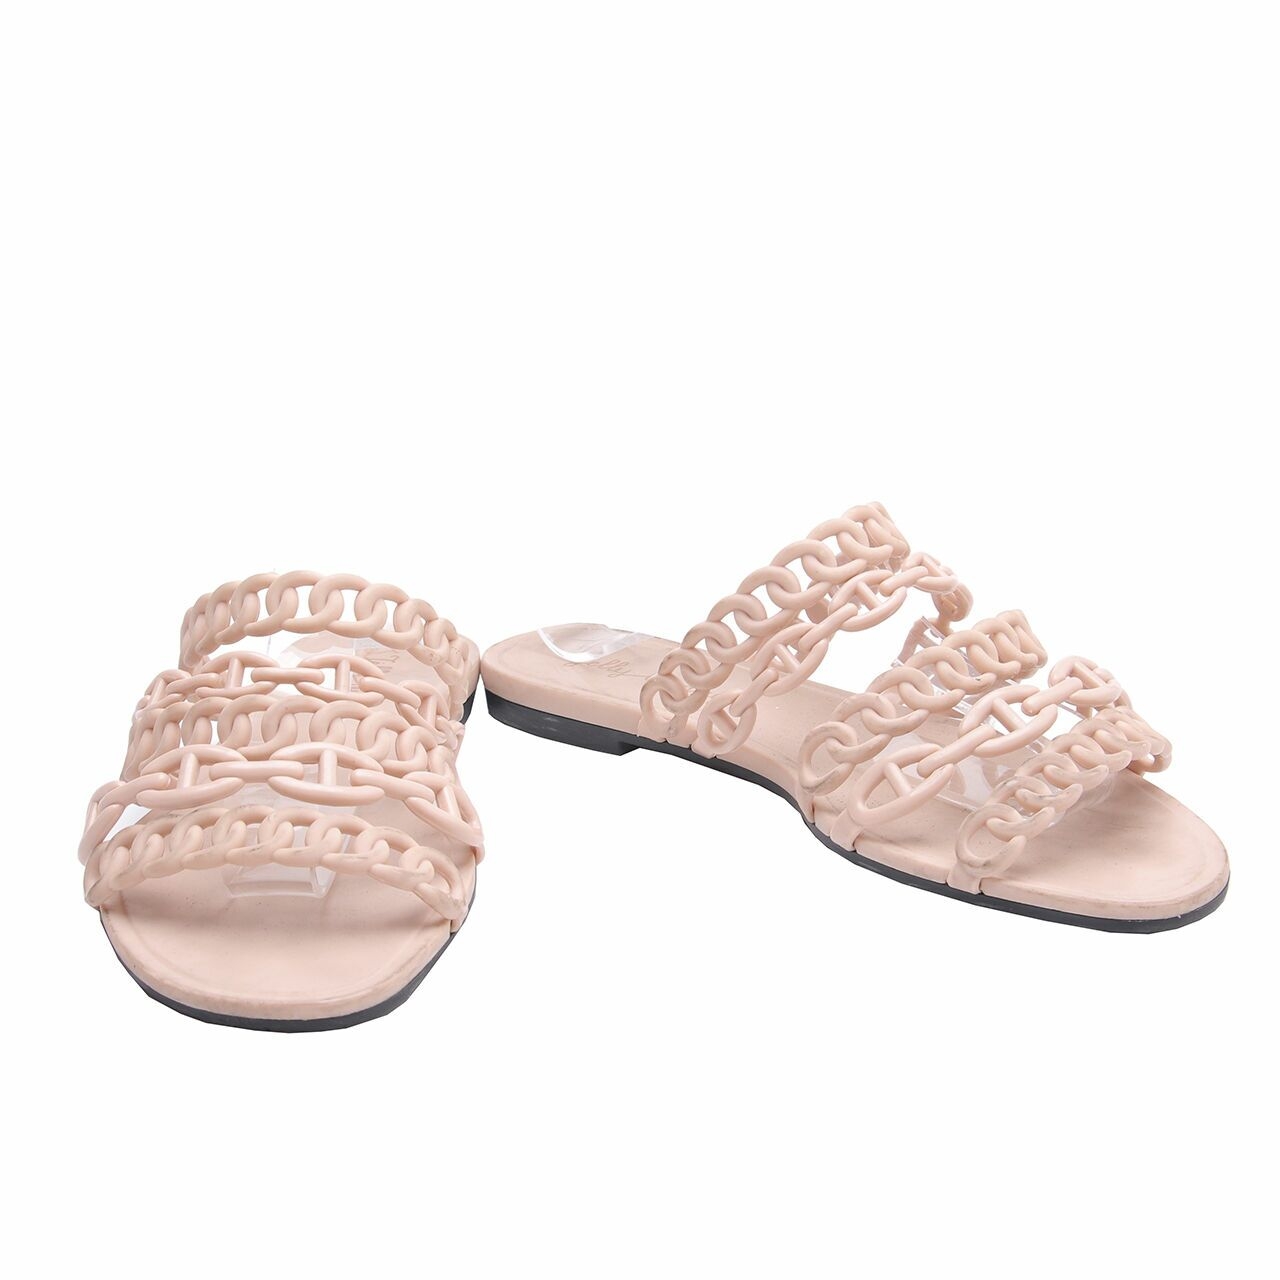 Jelly Bunny Dusty Pink Sandals